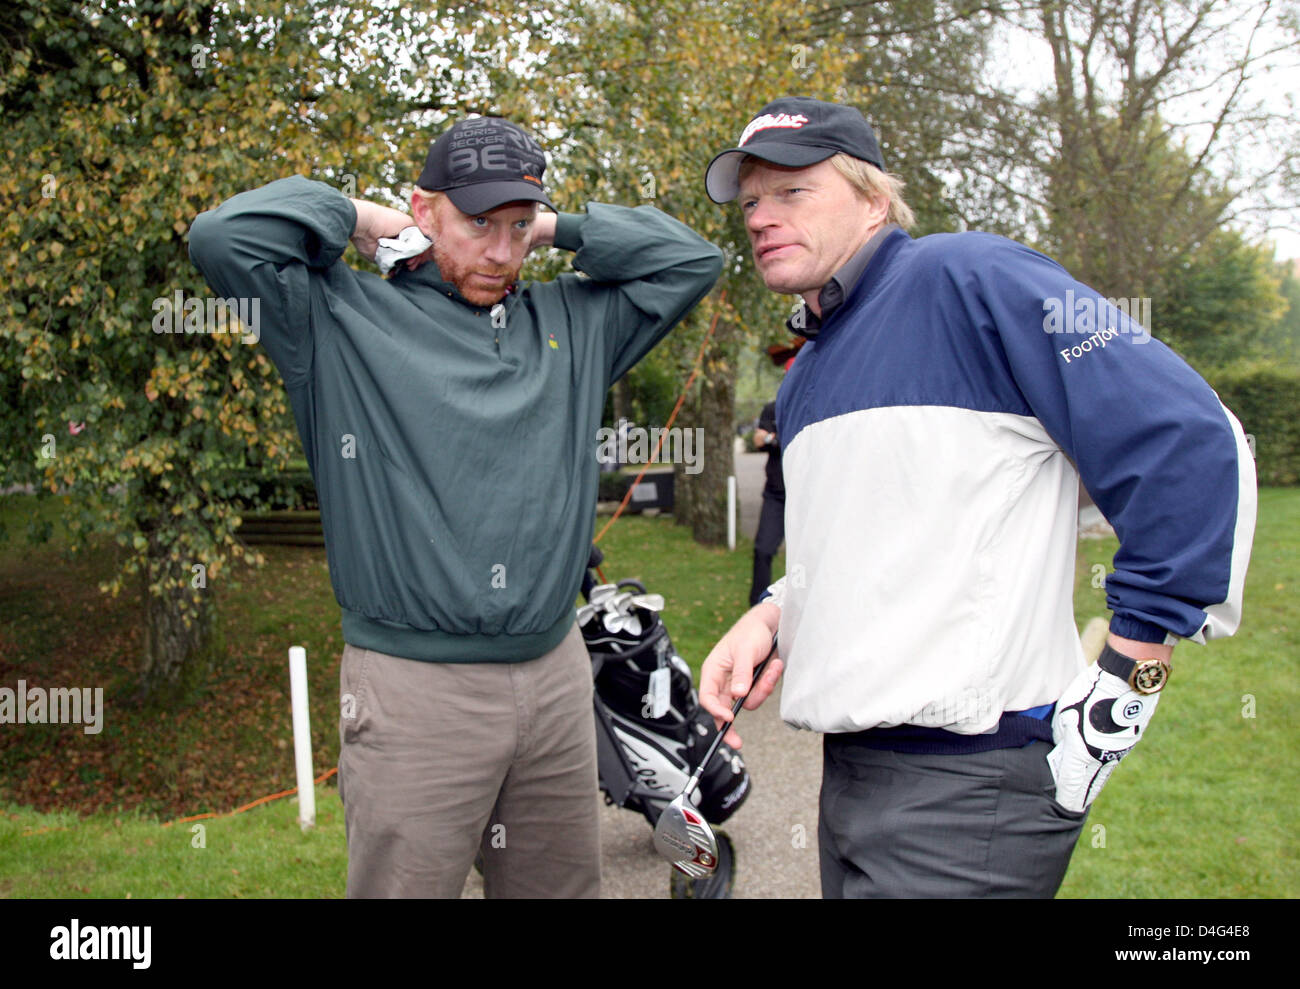 The picture shows former goal keeper Oliver Kahn (R) and former tennis professional Boris Becker during the 'Boris Becker Oktoberfest Golf Trophy' for the benefit of the Clever-Becker foundation on the golf course of Schloss Egmating, 30 kilometres to the southeast of Munich, Germany, 28 September 2008. The 'Oktoberfest Golf Trophy' takes place for the sixth time. Photo: Ursula Due Stock Photo